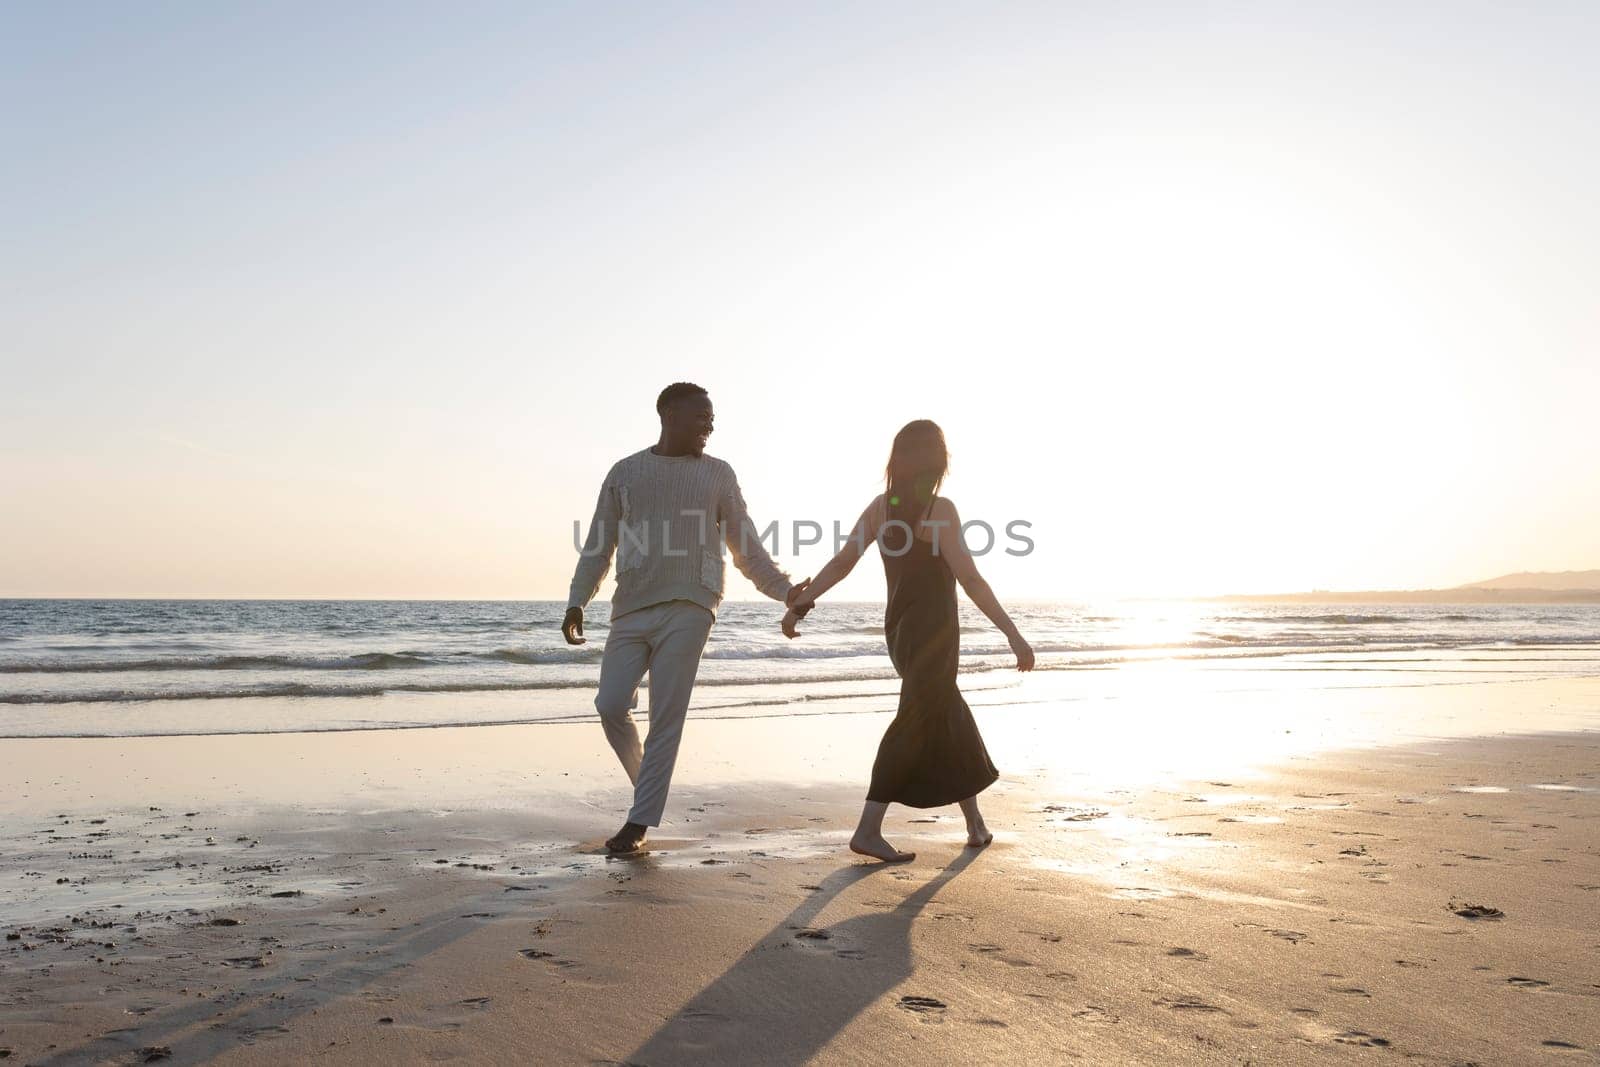 A couple is walking on the beach holding hands. The woman is wearing a black dress. The sun is setting in the background